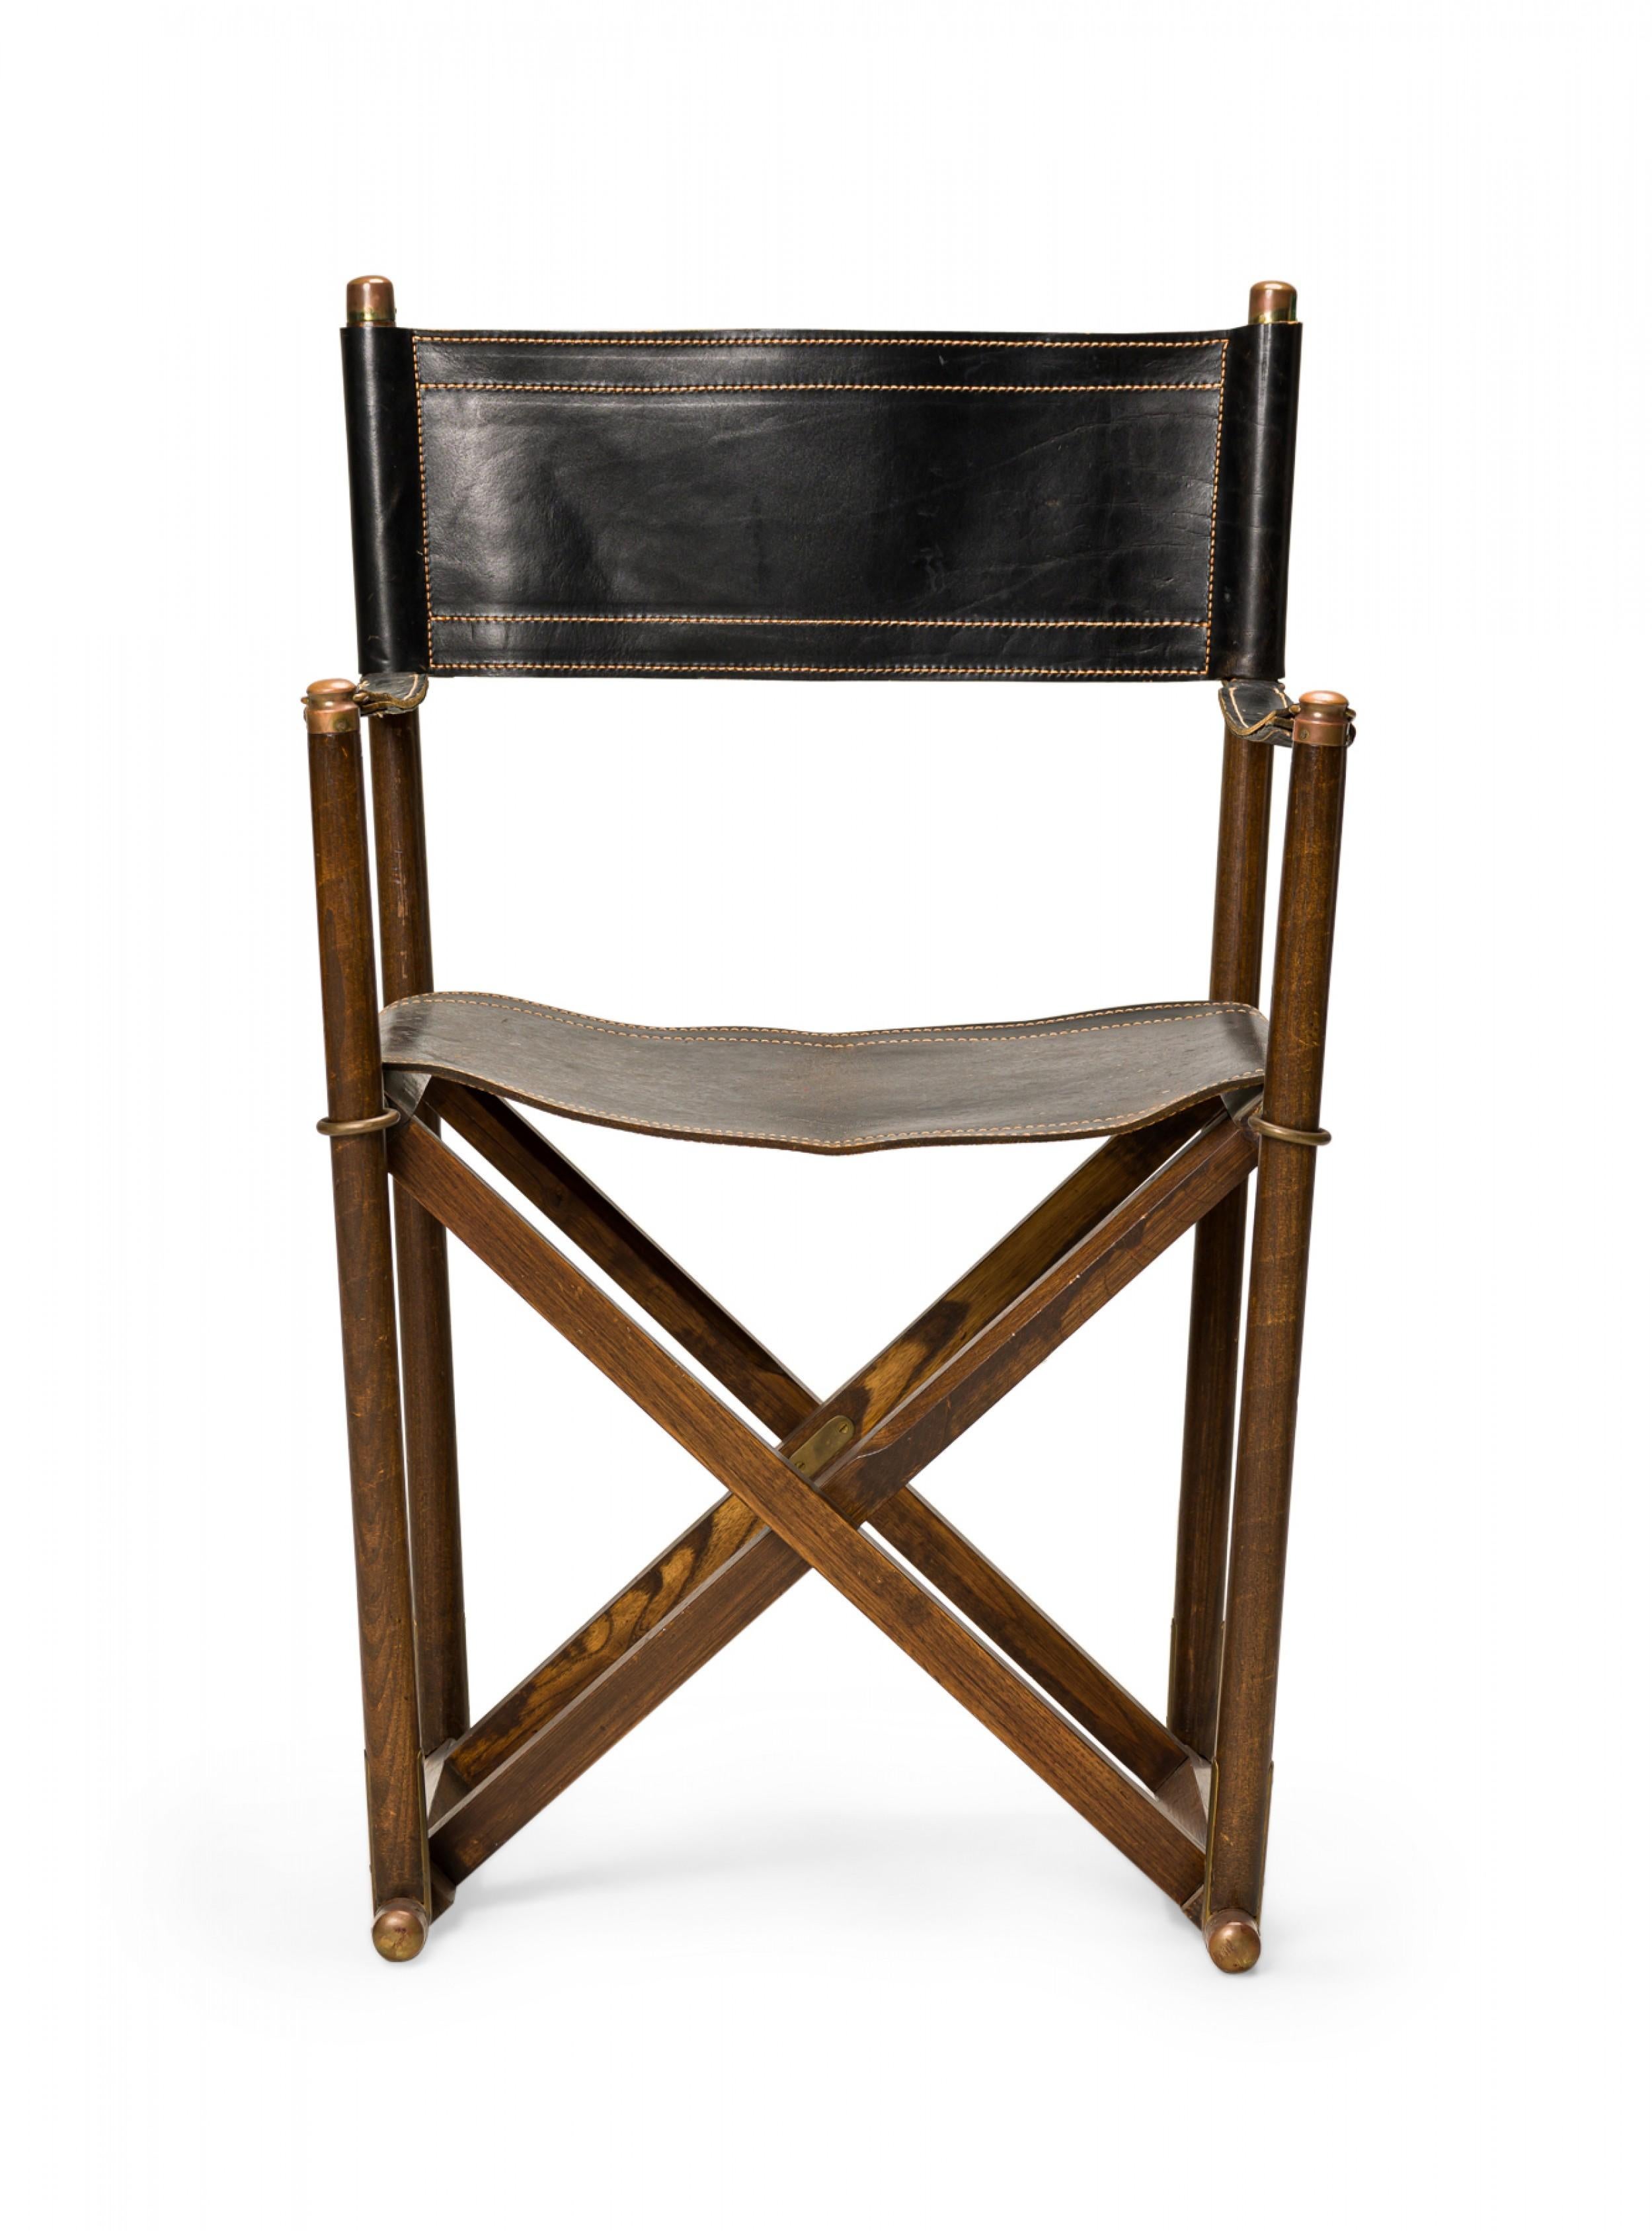  Sarreid Black Leather and Walnut Folding Campaign / Director's Chair 2